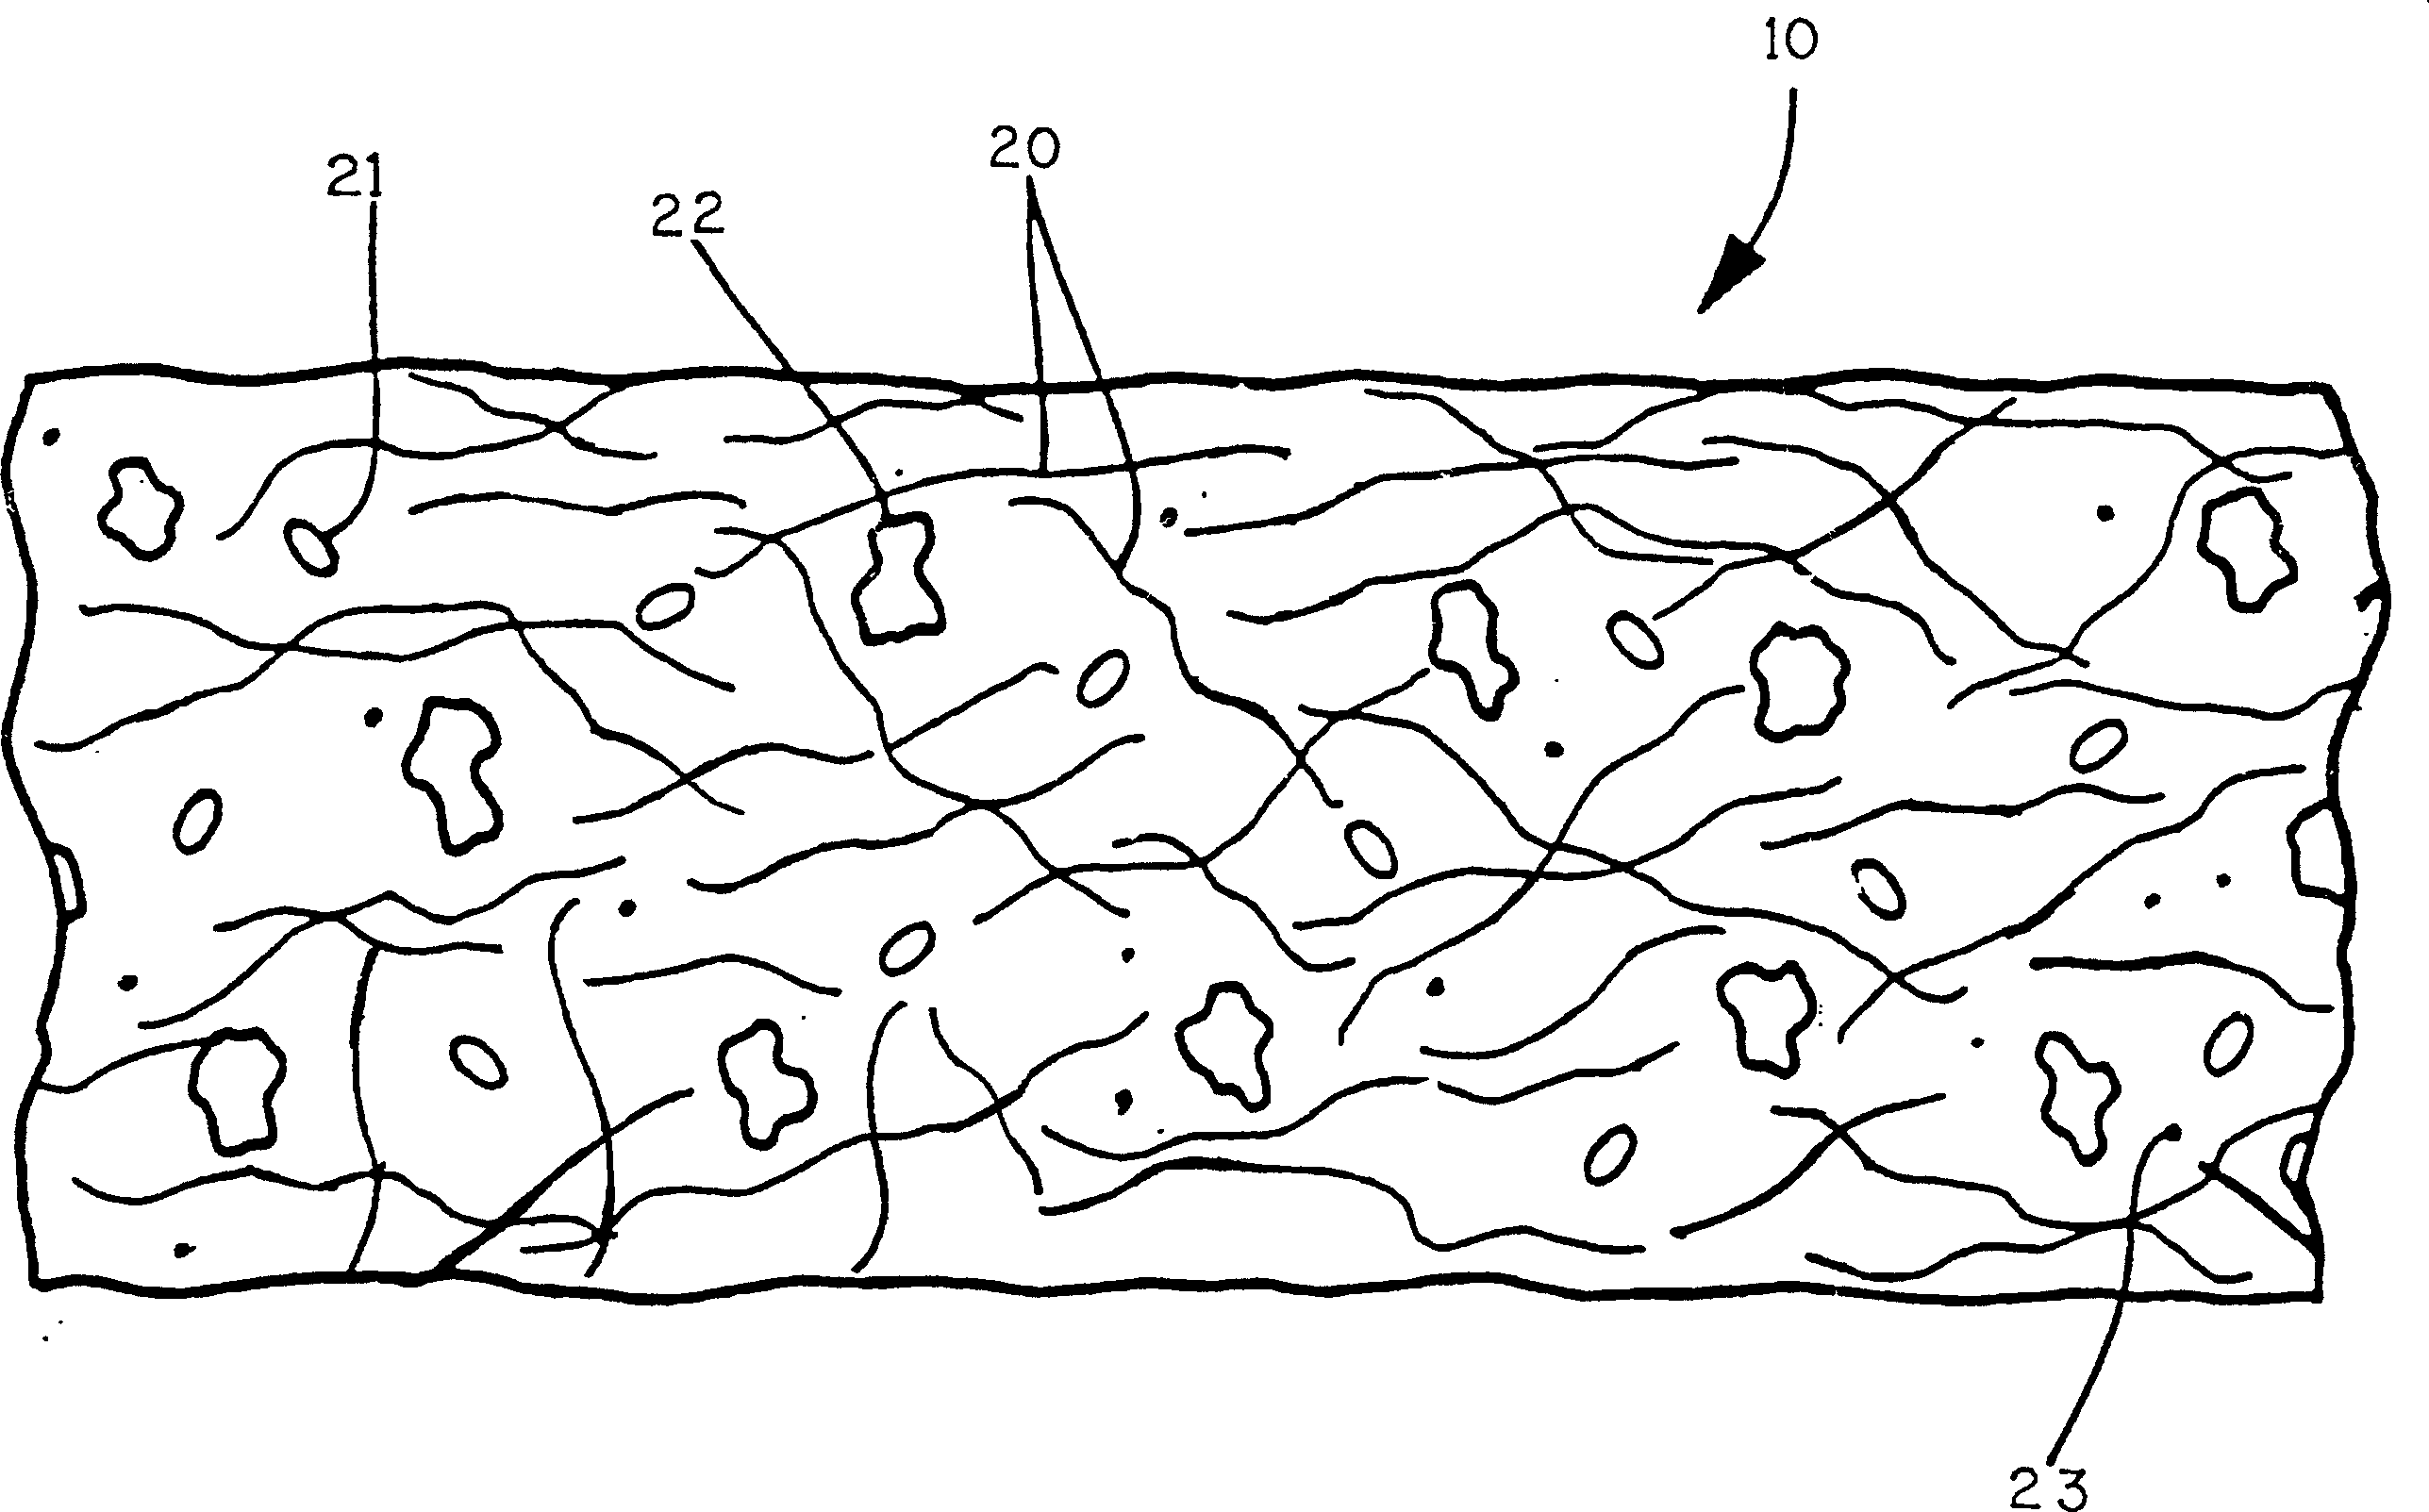 Artificial seedbeds and method for making same